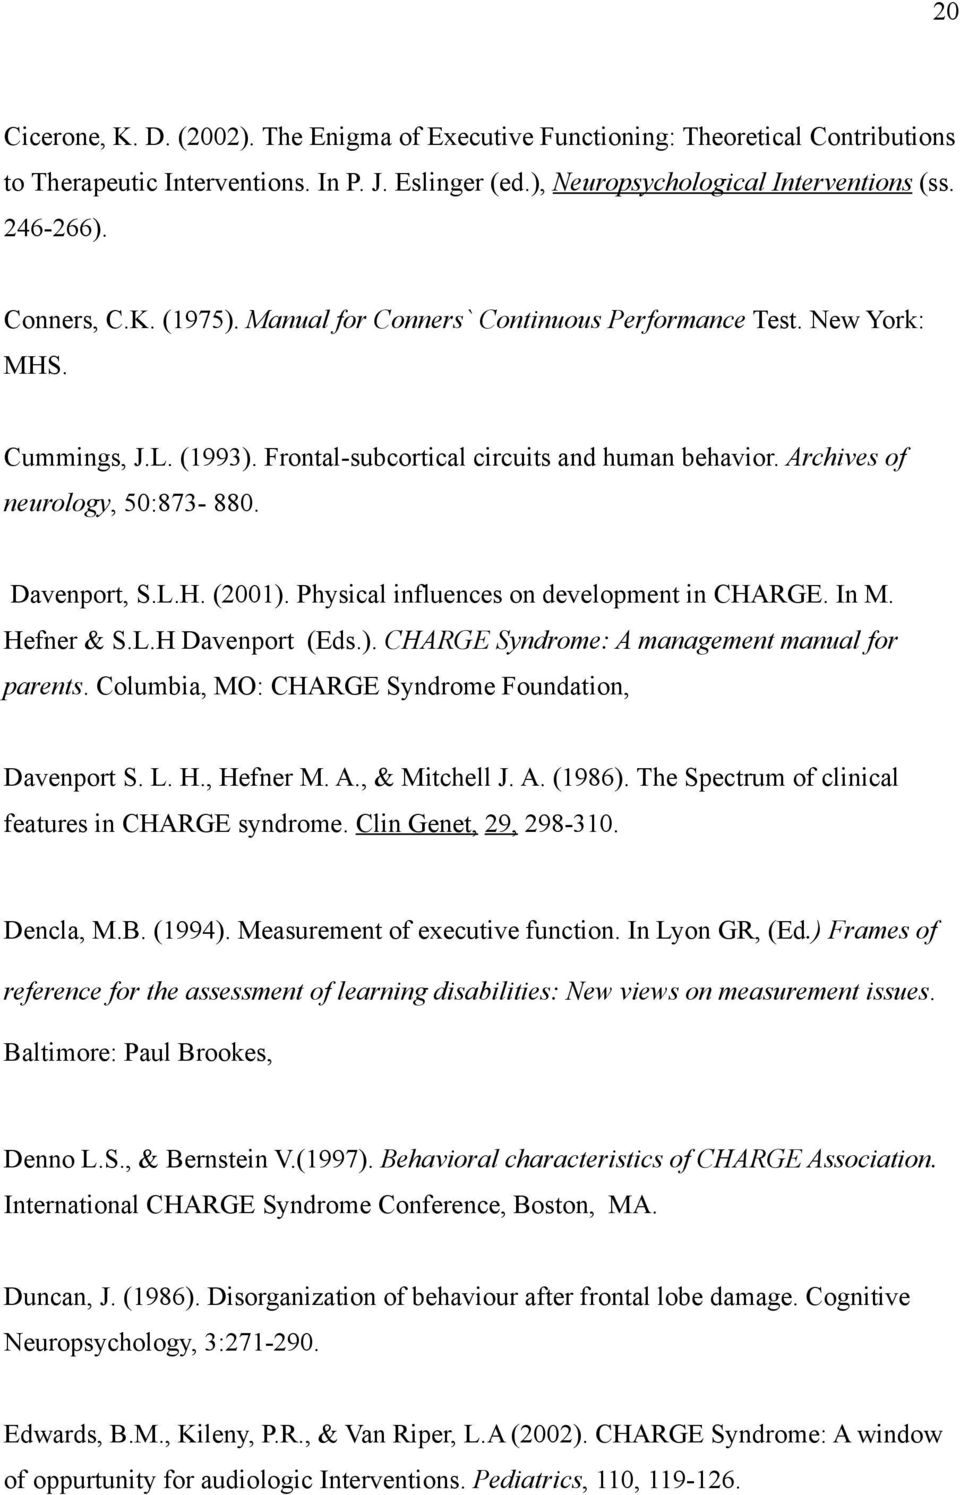 Davenport, S.L.H. (2001). Physical influences on development in CHARGE. In M. Hefner & S.L.H Davenport (Eds.). CHARGE Syndrome: A management manual for parents.